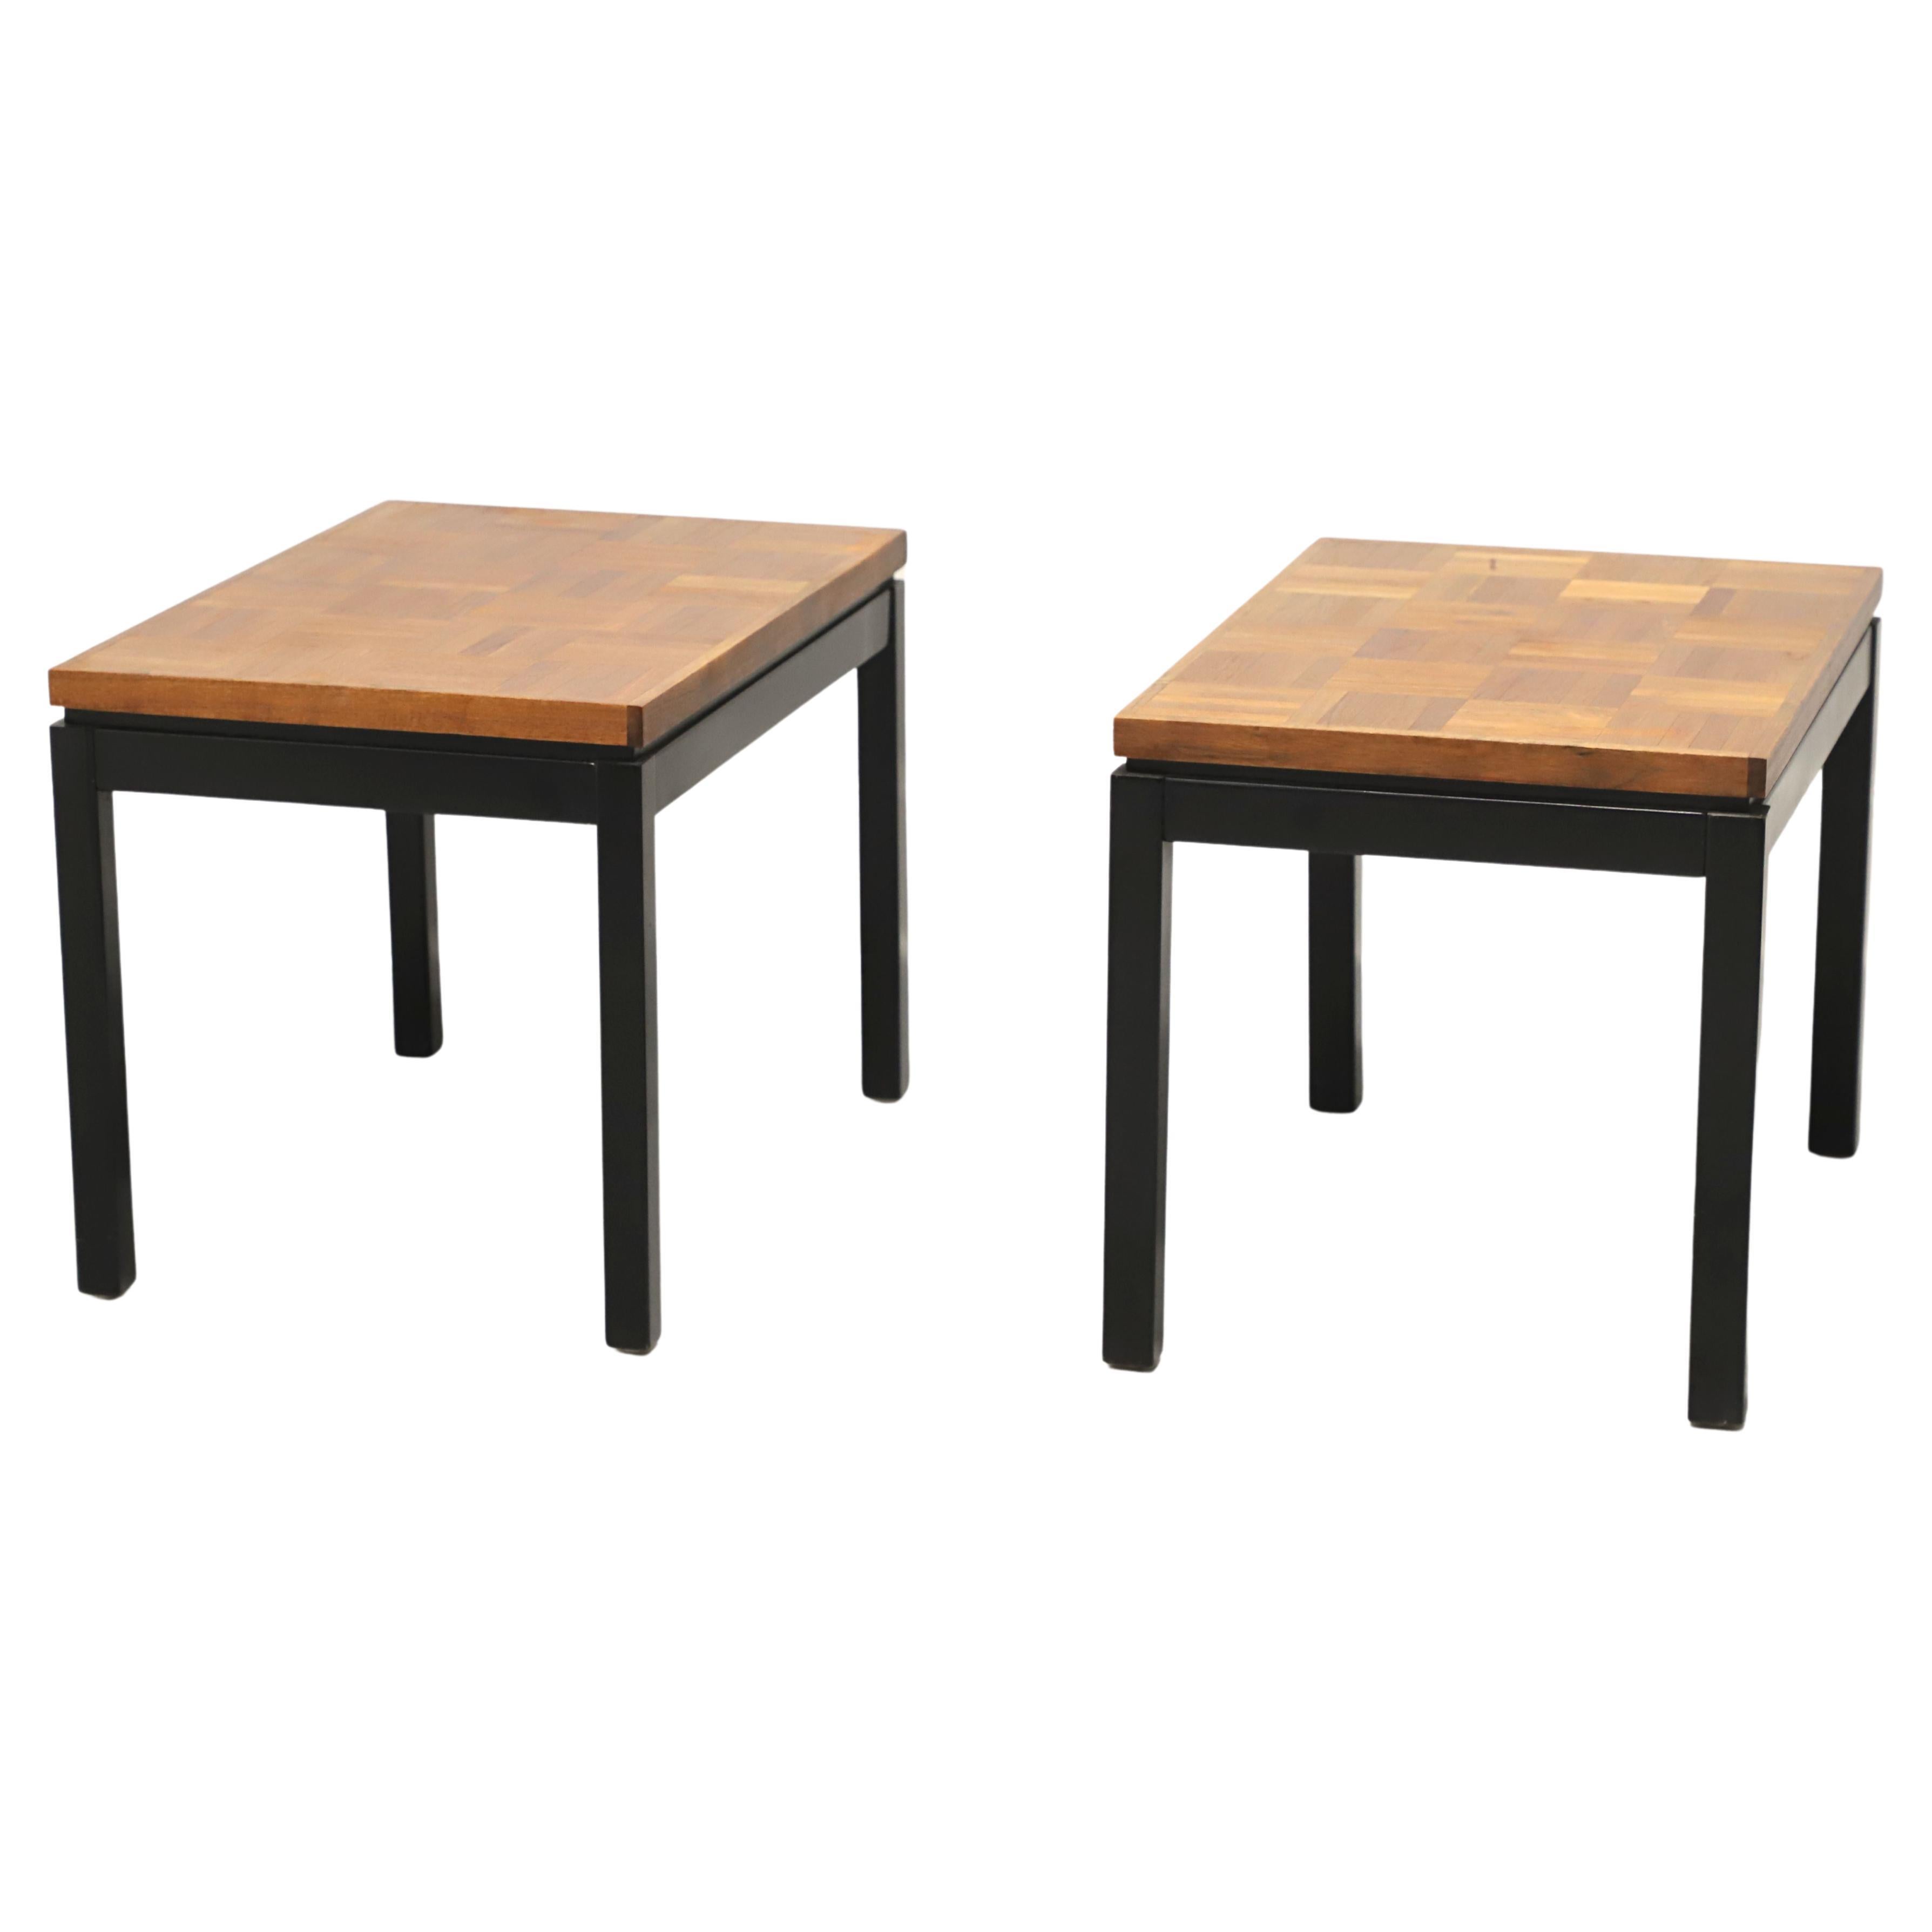 Late 20th Century Black Lacquer & Wood Parquet Side Tables - Pair